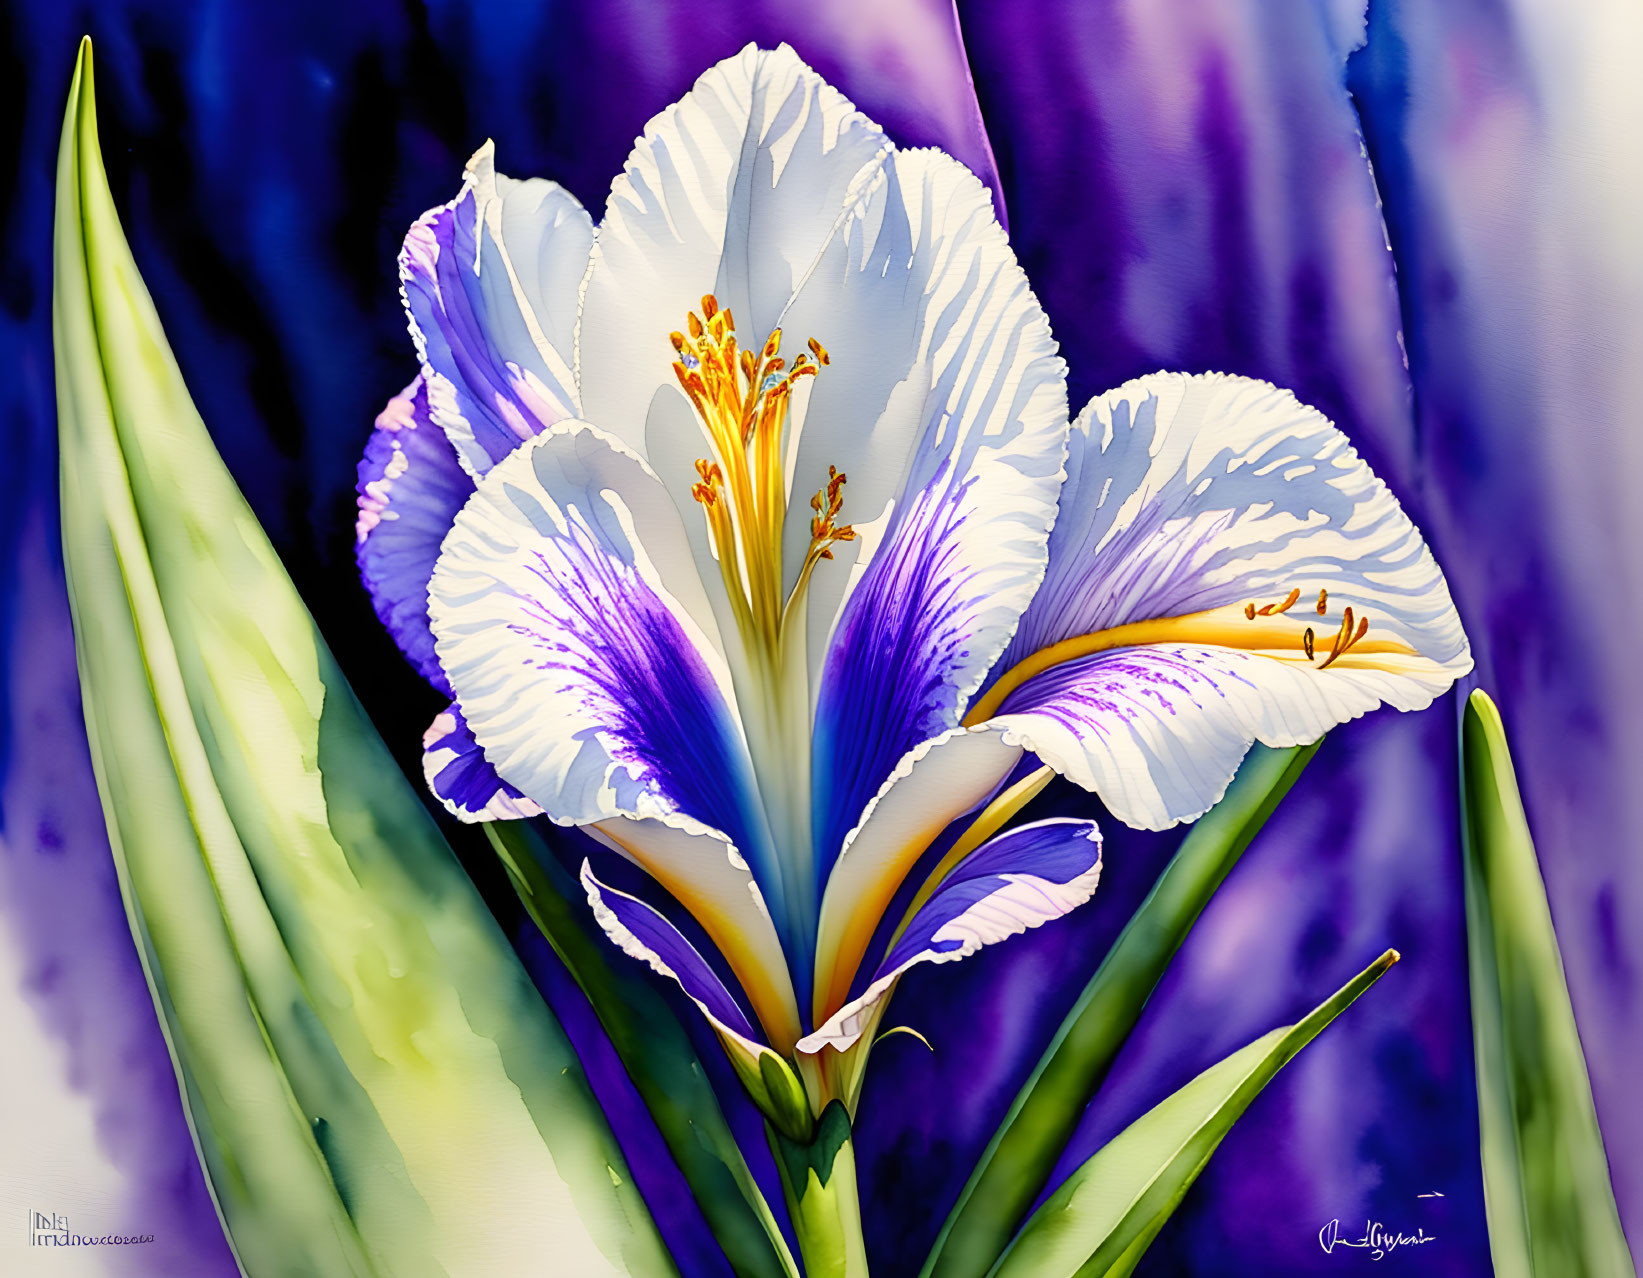 Colorful digital painting of white and purple iris flower with orange stamens on abstract purple backdrop